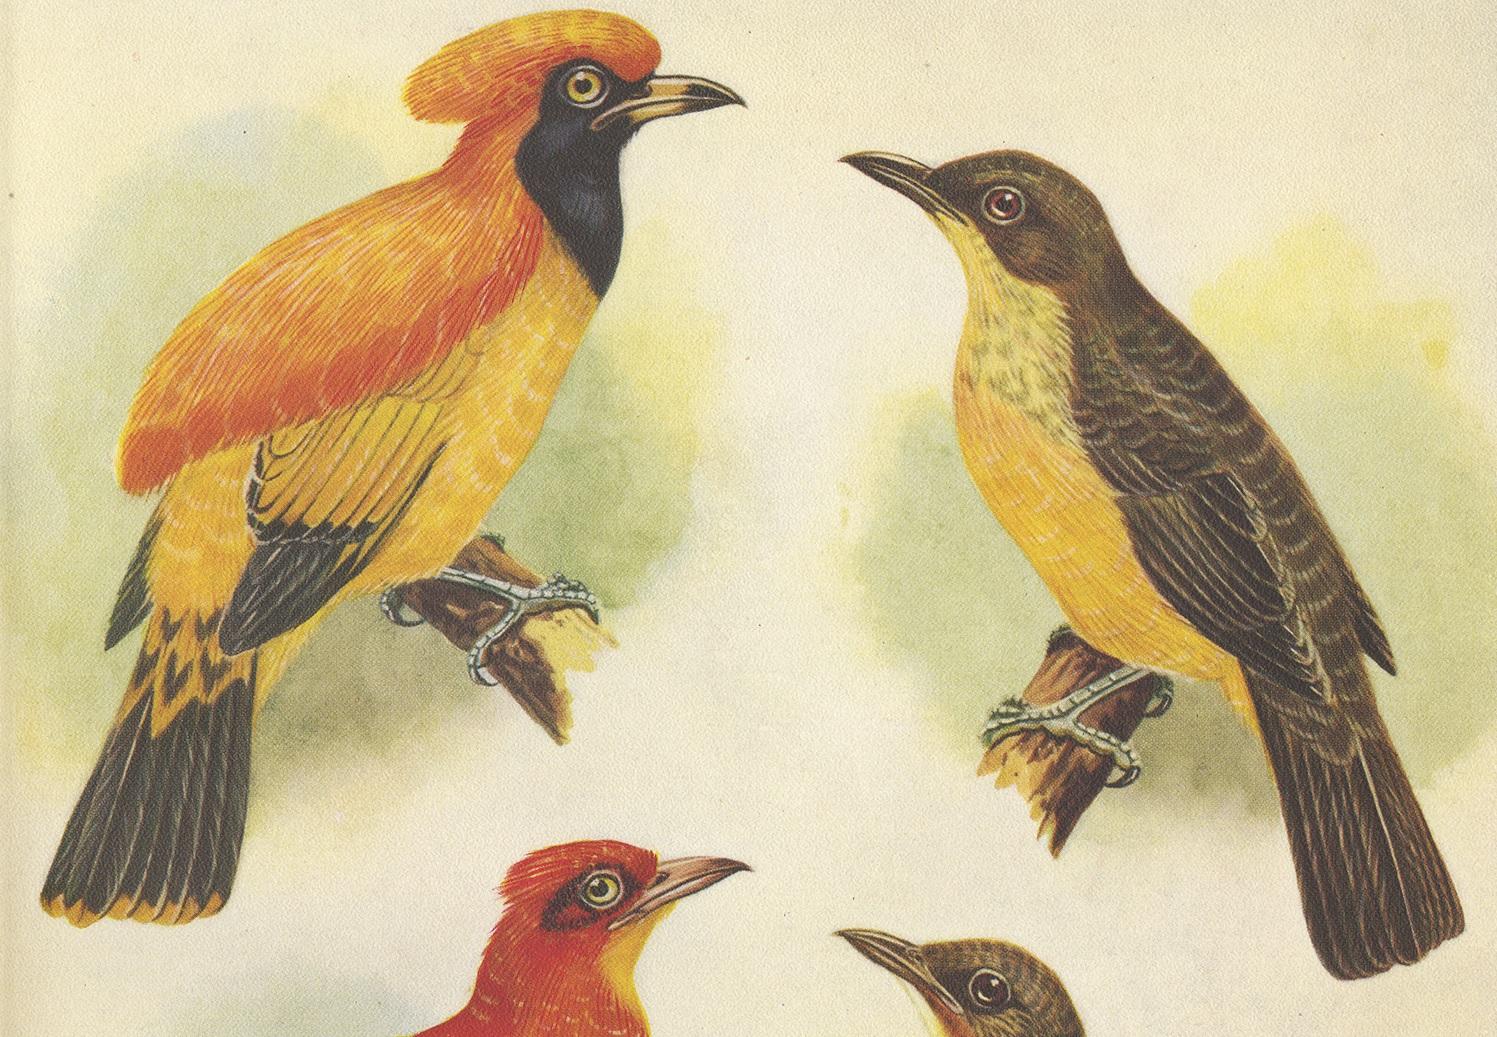 Decorative print illustrating the golden bird and the yellow-throated golden bird. This authentic print originates from 'Birds of Paradise and Bower Birds' by Tom Iredale. With coloured illustrations of Every Species by Lilian Medland. Published in